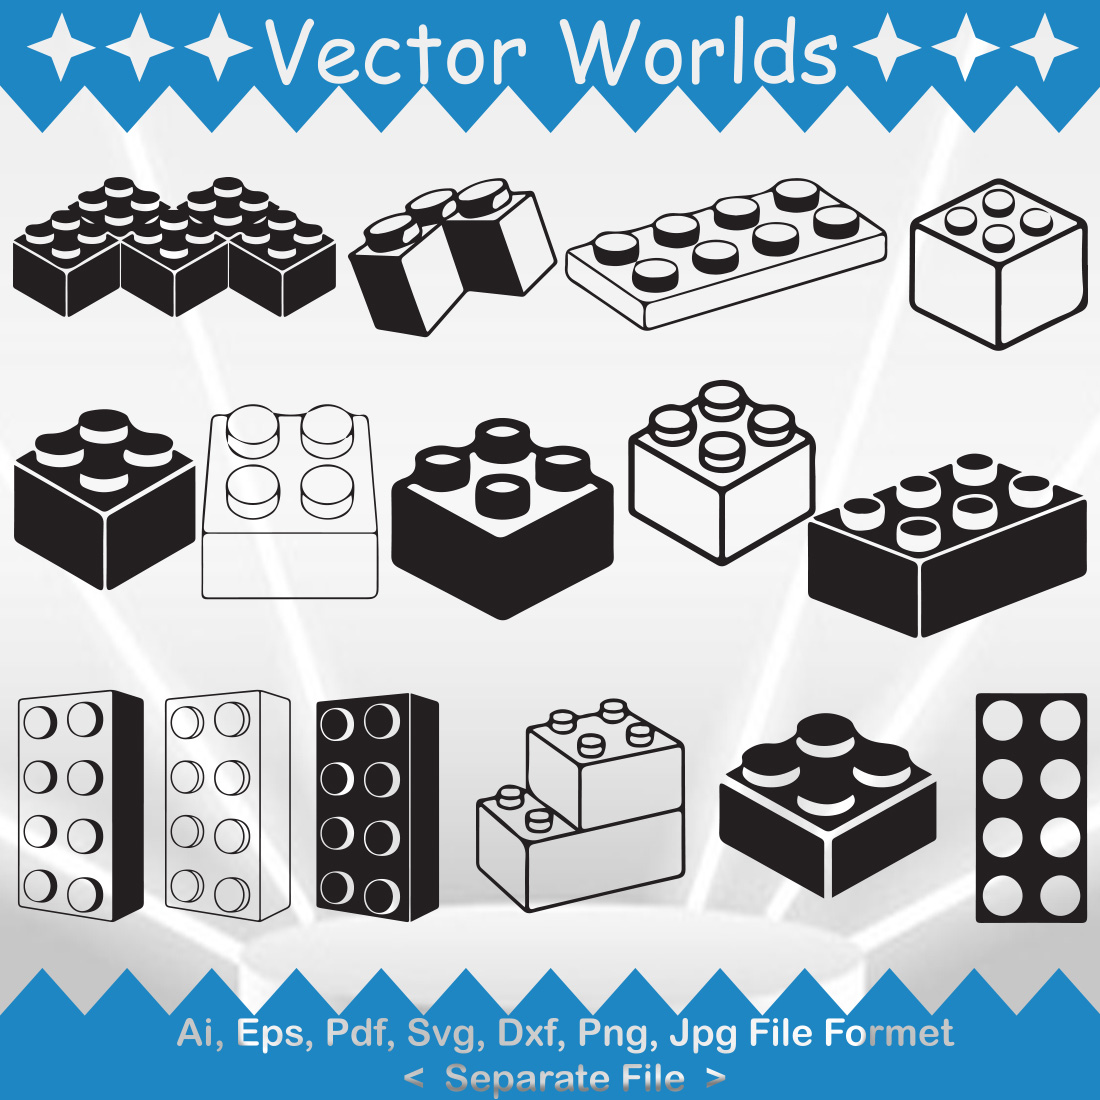 Lego Blocks Vector PNG Images, Lego Block Border In Pastel Color, Pastel  Block, Pastel Lego, Lego PNG Image For Free Download